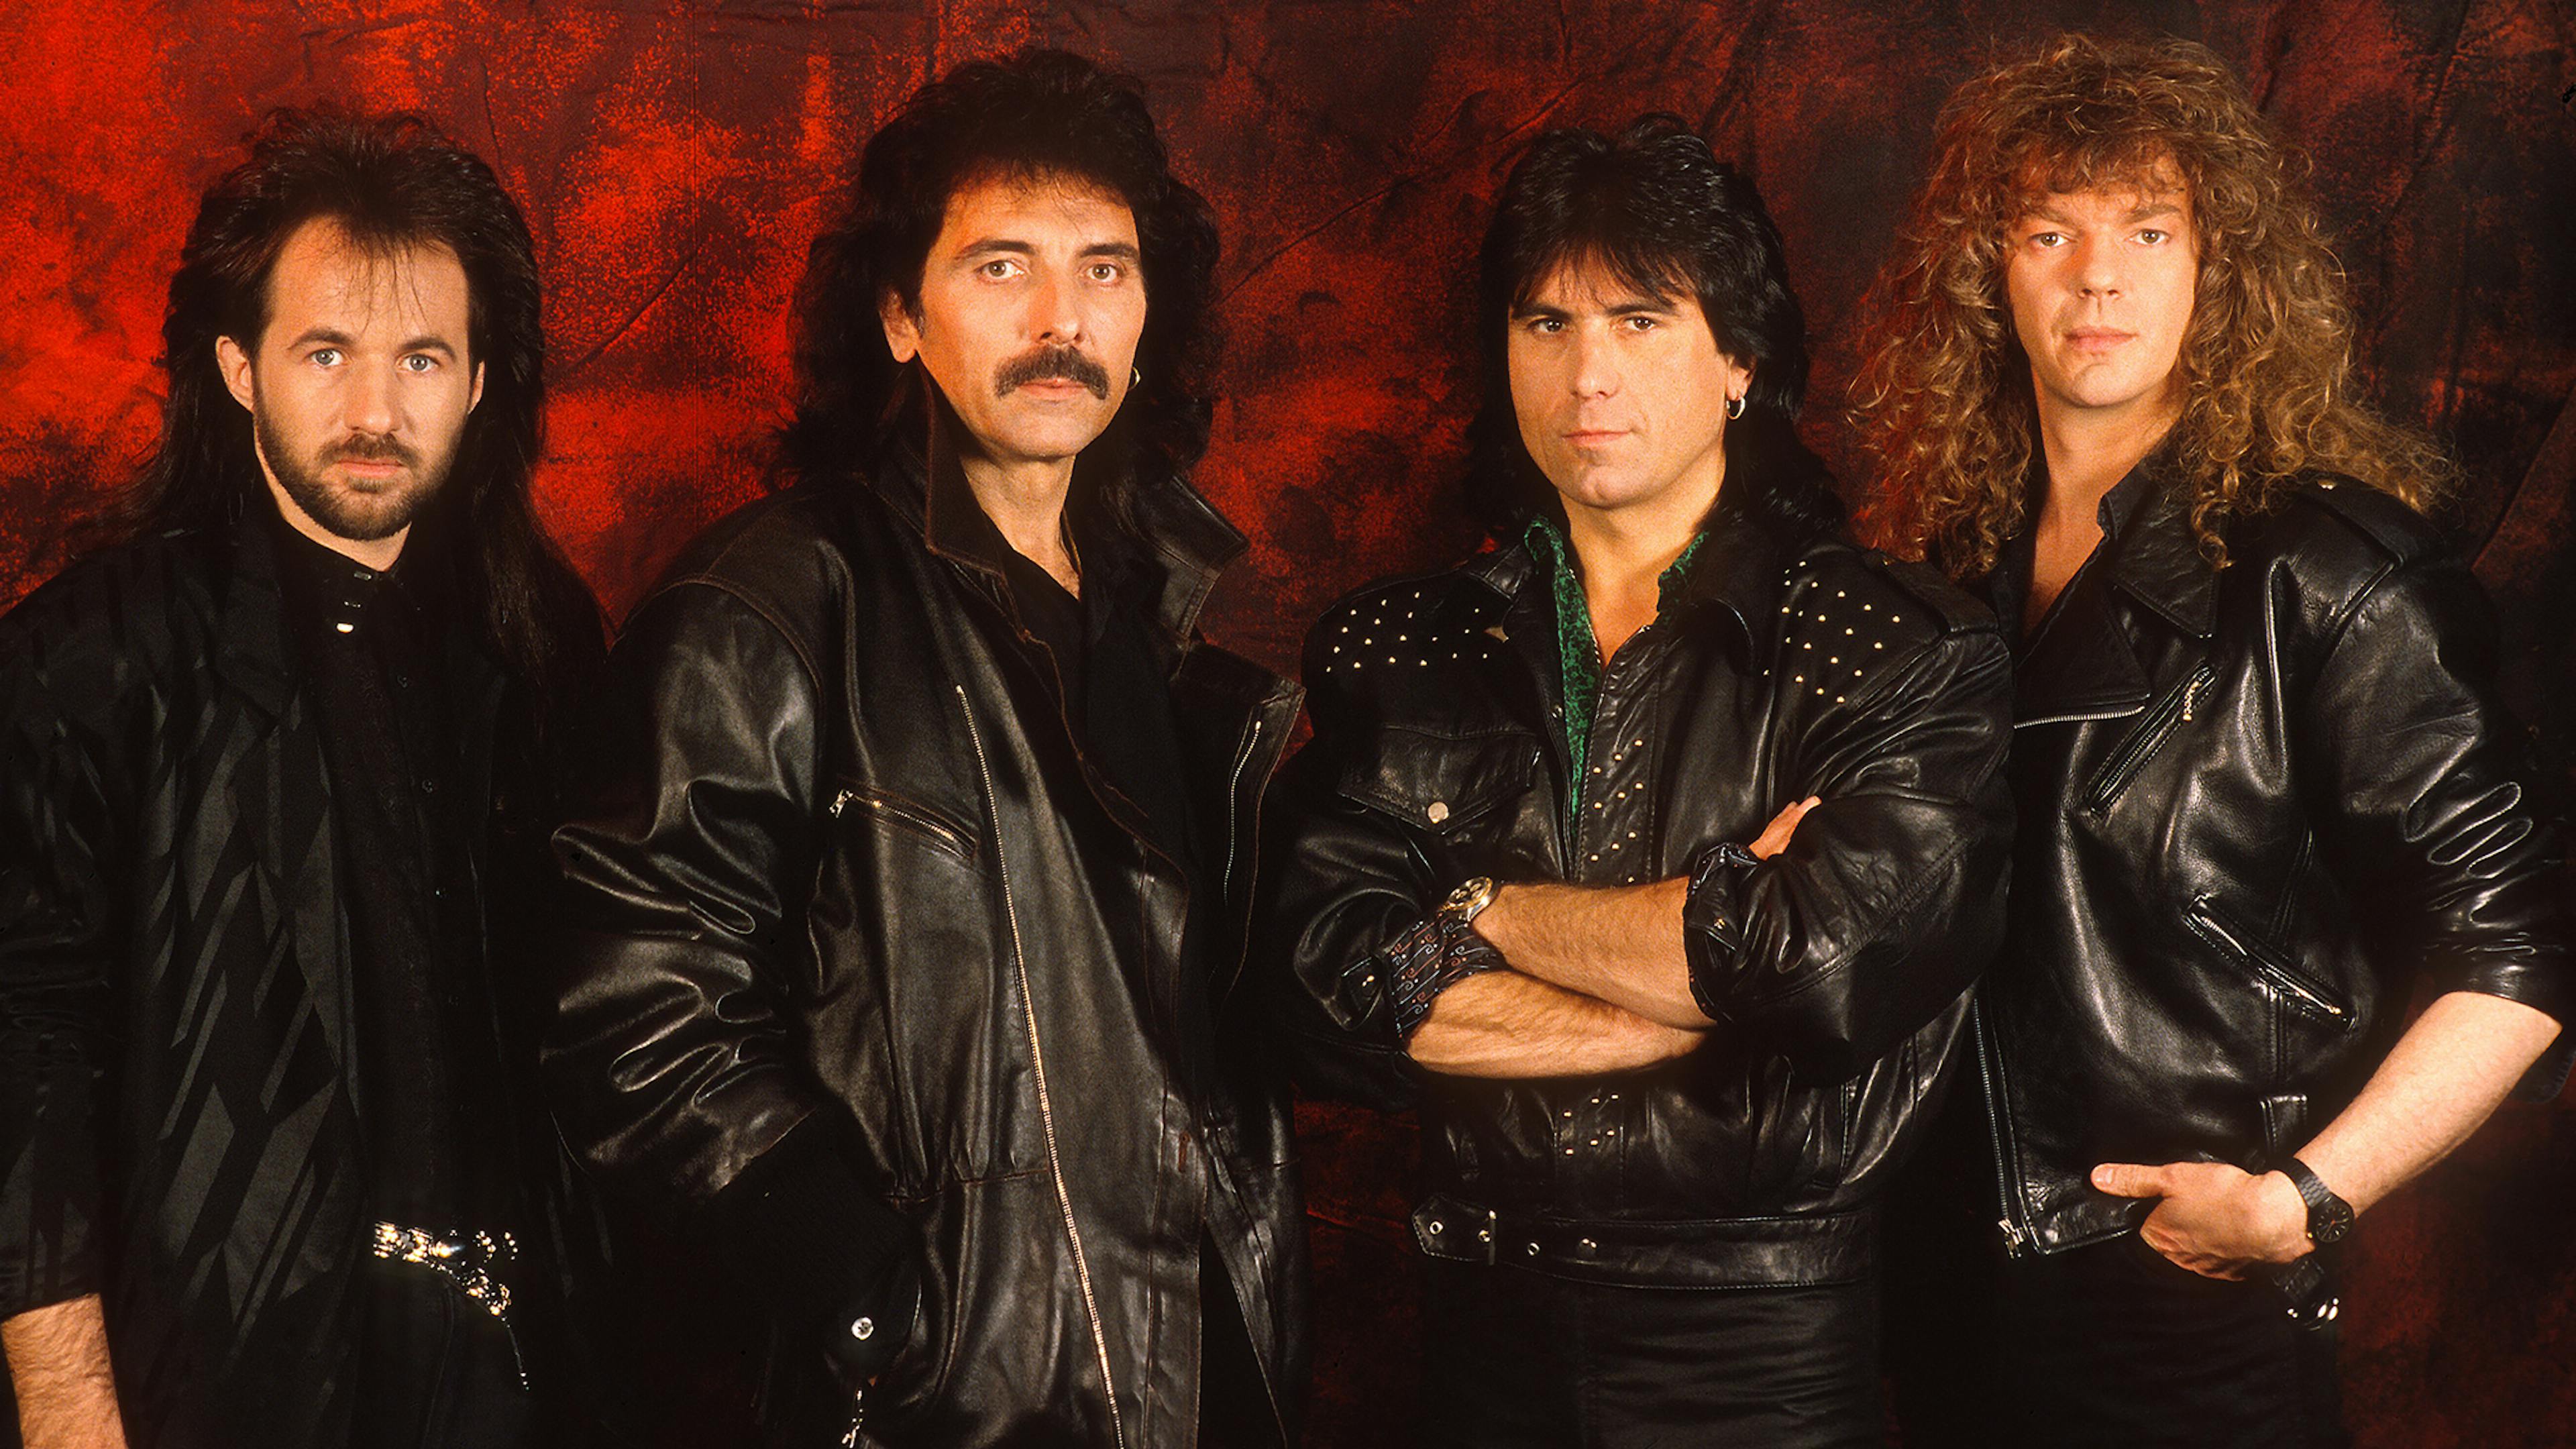 Tony Iommi on Black Sabbath’s “lost” era: “It’s a shame, because we made some great music”